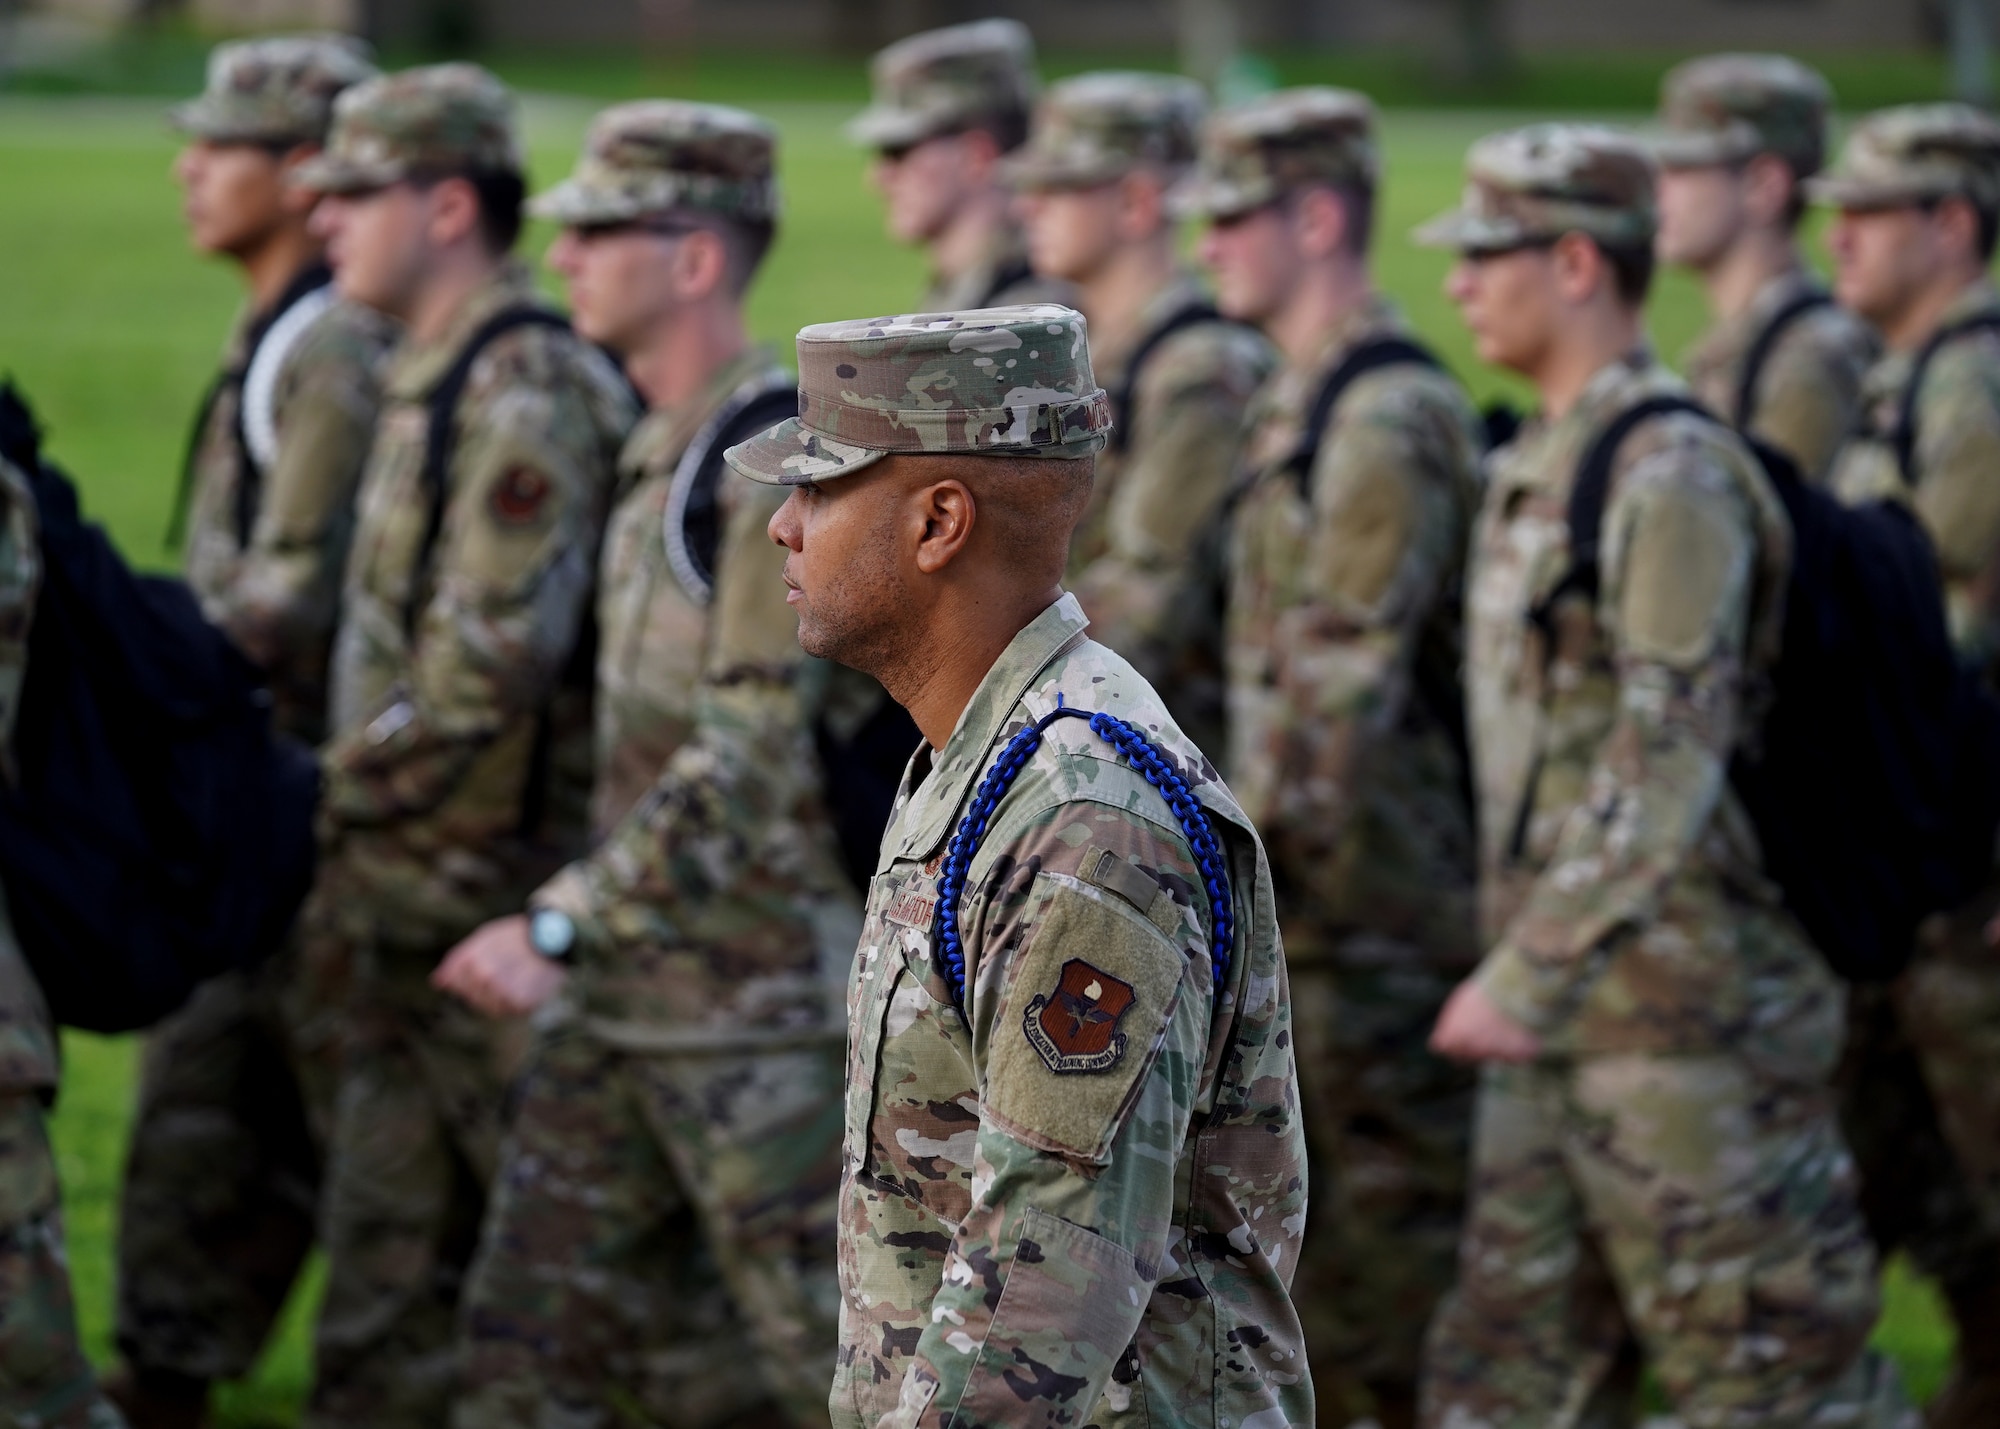 U.S. Air Force Tech. Sgt. Alvin Morris, 336th Training Squadron master military training leader, marches Airmen in training to school on Keesler Air Force Base, Mississippi, June 29, 2021. “I’ve been empowered with the tools to mold Airmen to be successful and to also challenge them to grow,” said Morris. “Understanding this pivotal role and short amount of time that I have to impact each Airman keeps me ready to mentor, train and lead at all times. Developing our Airmen, watching them grow into leaders is very fulfilling for my position.” (U.S. Air Force photo by Senior Airman Spencer Tobler)